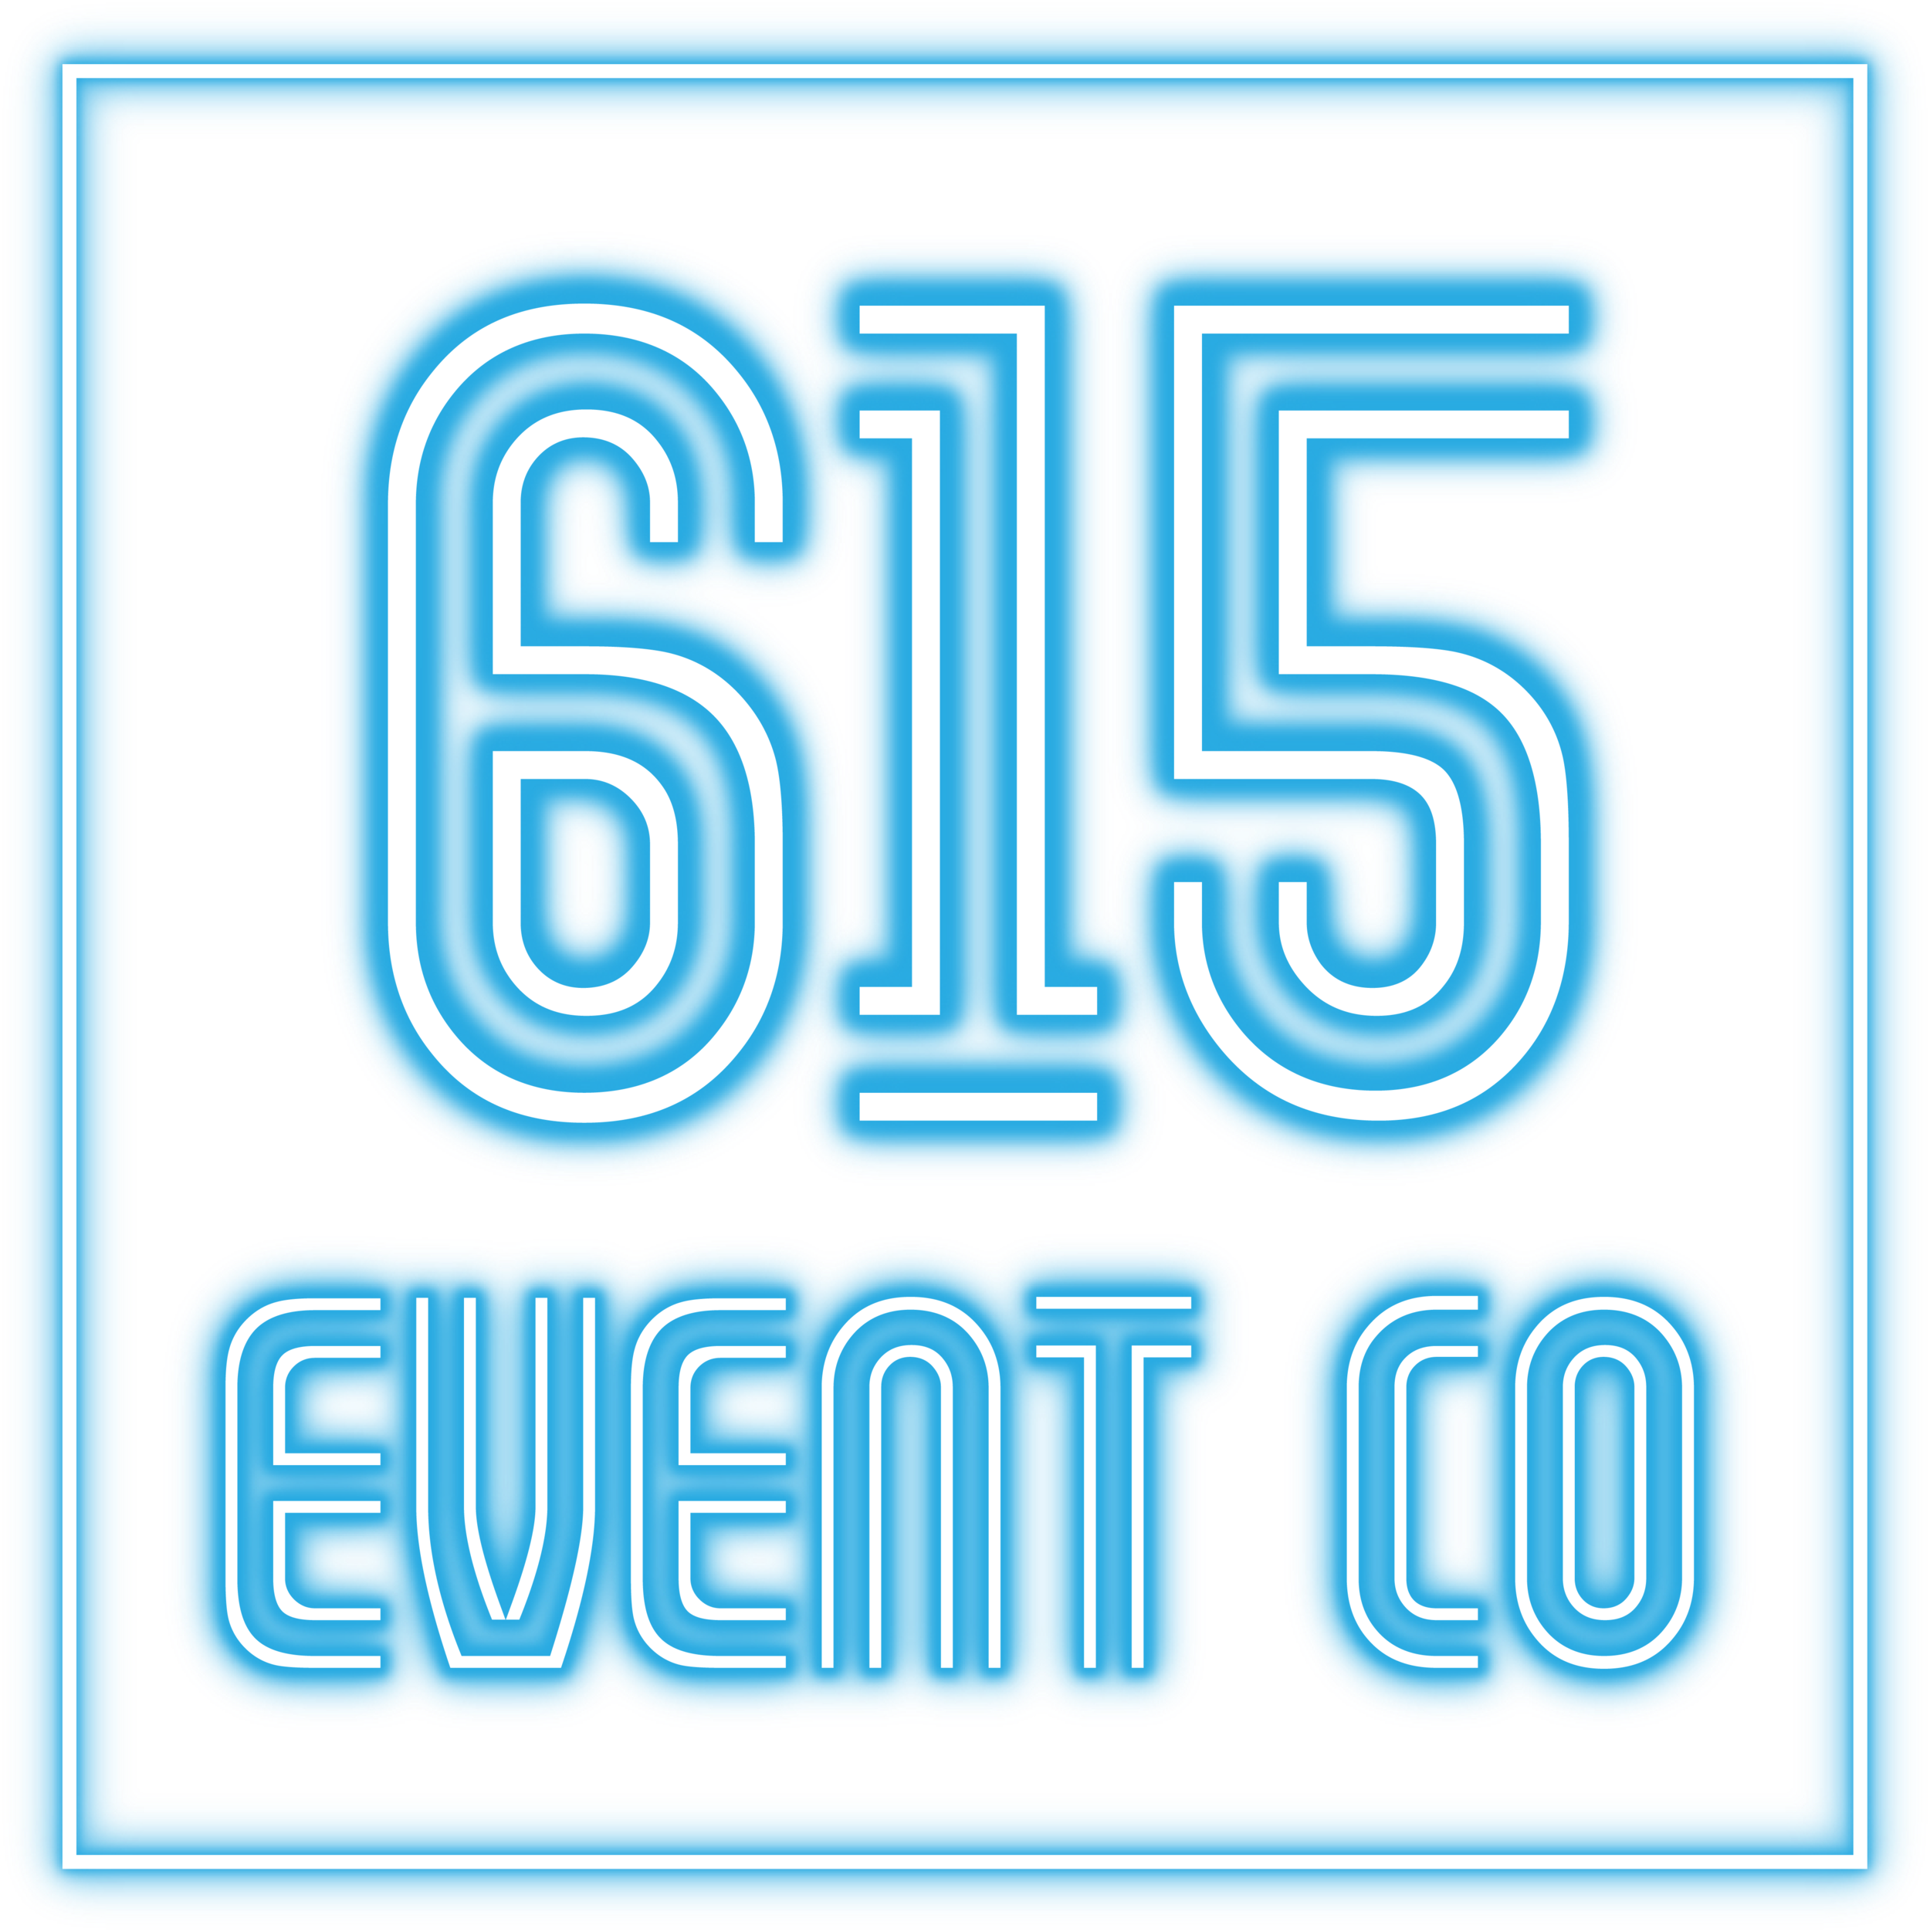  615 Event Co